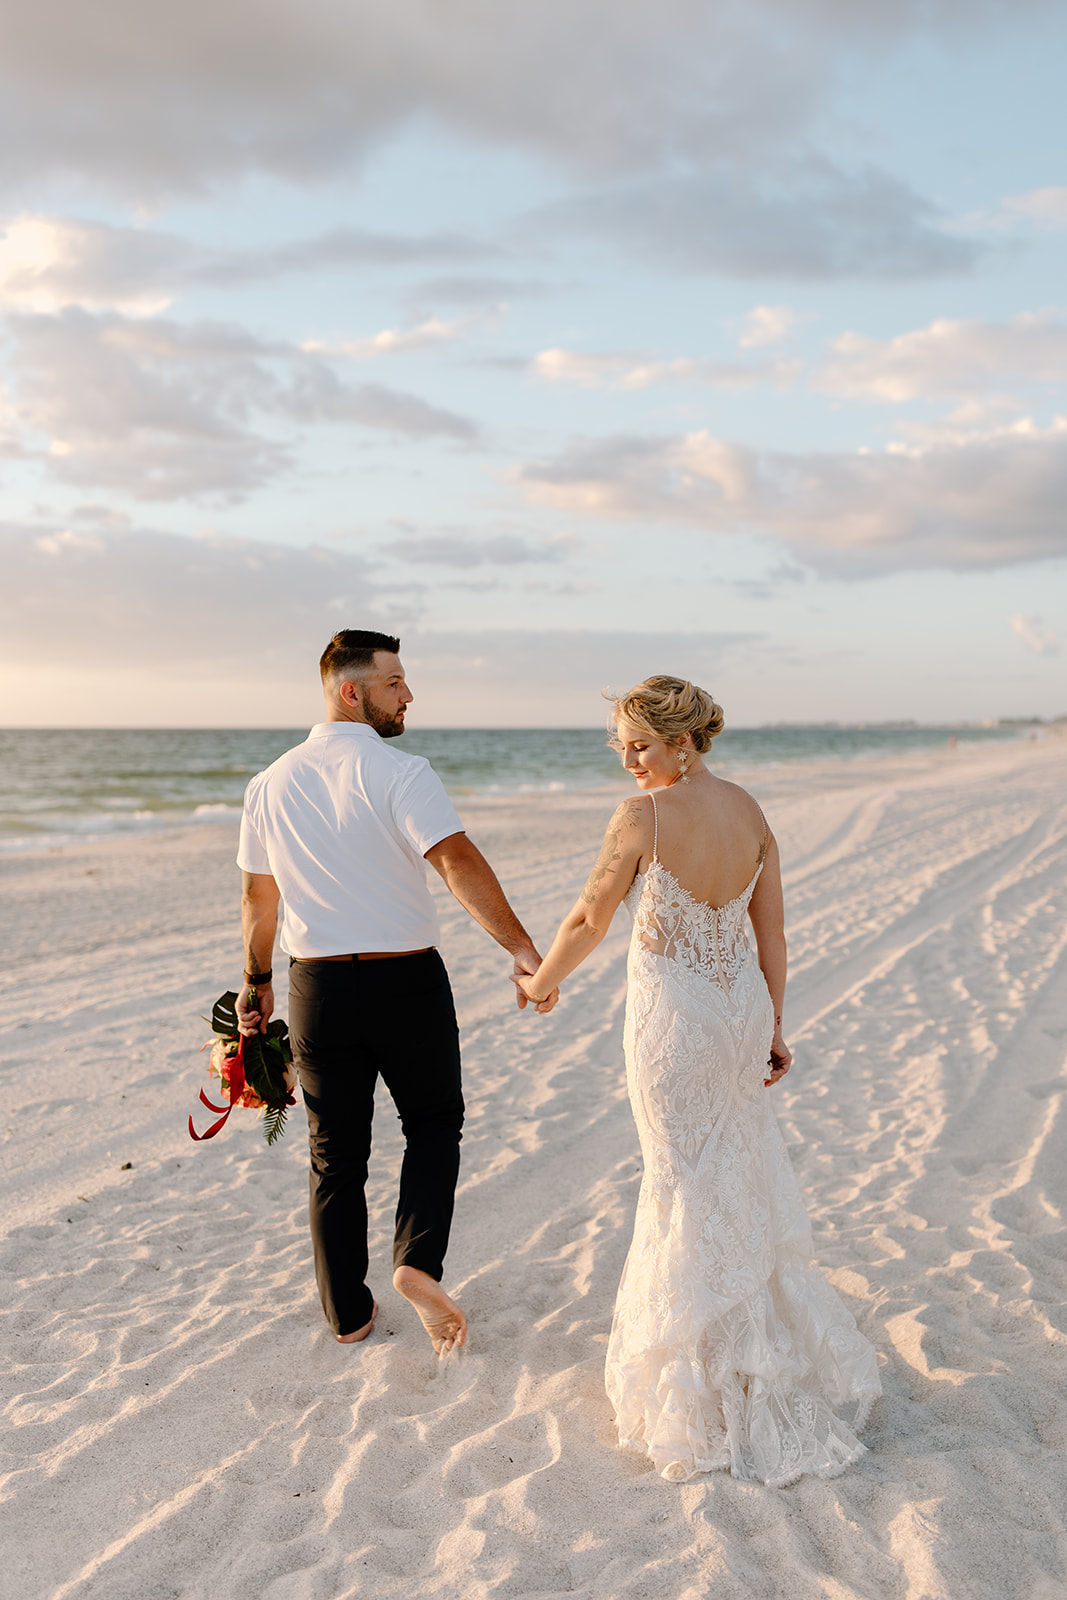 Bride and groom hold hands and walk along the beach